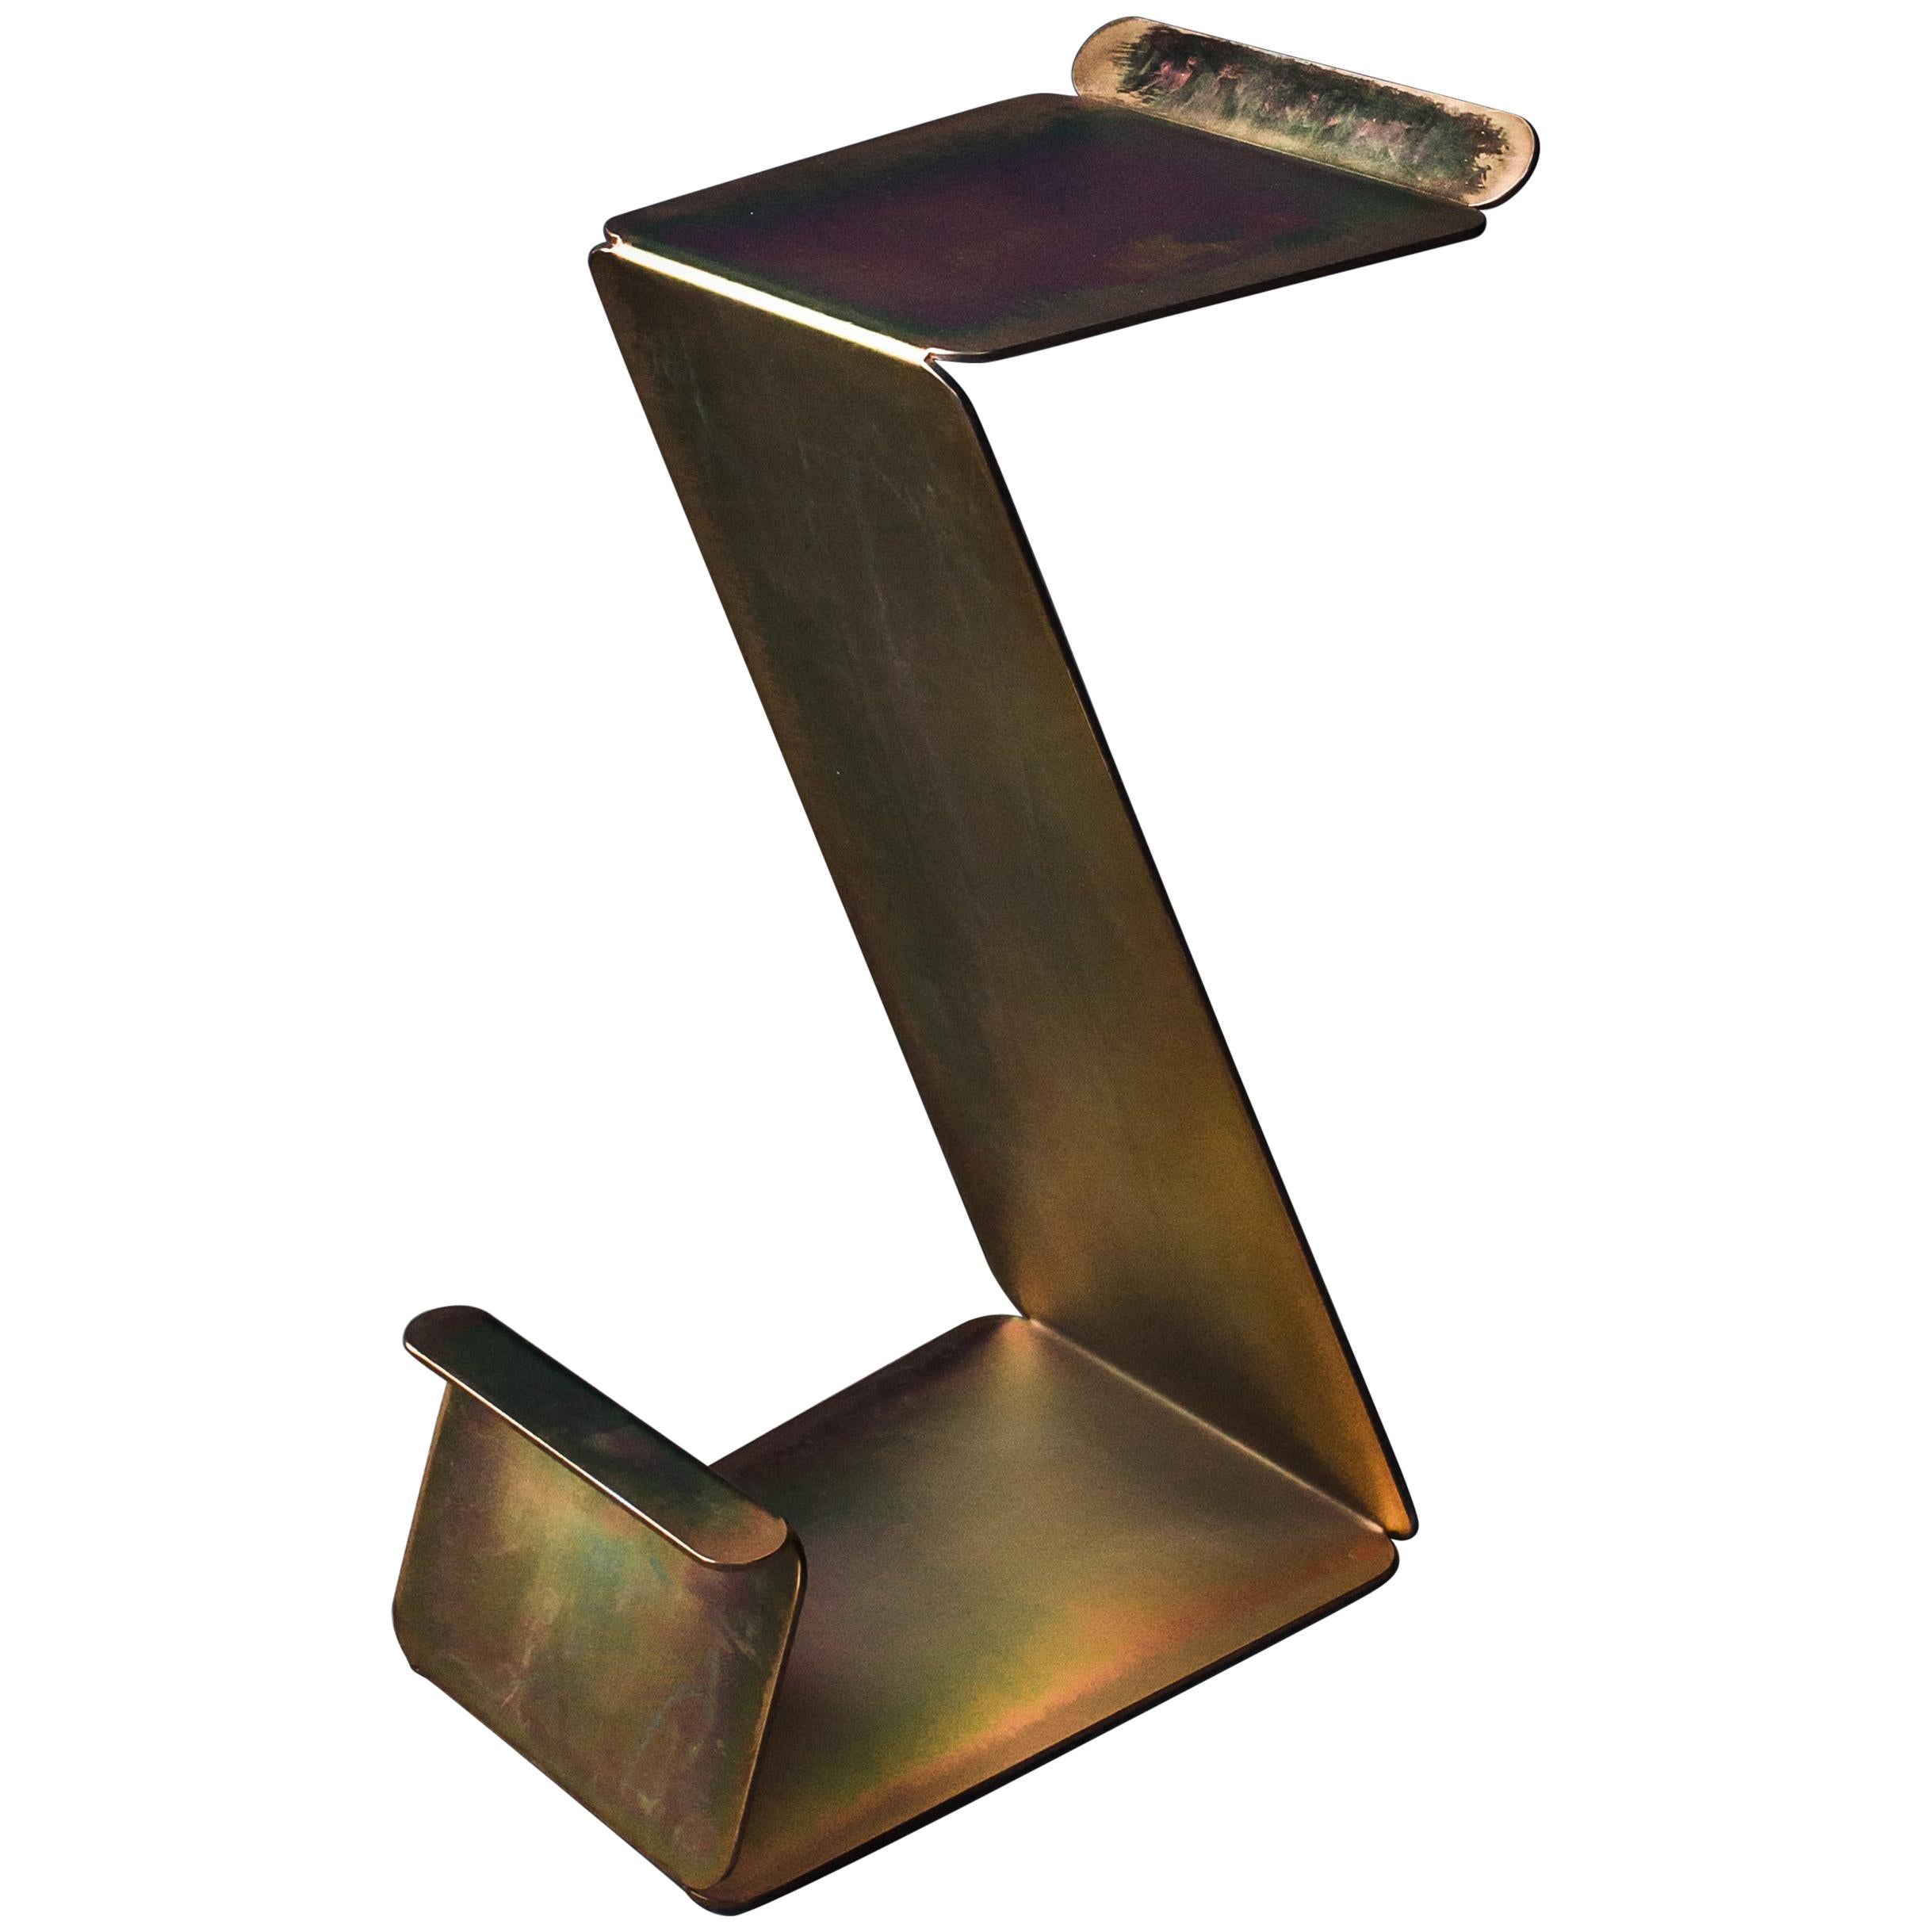 Fe Bar Height Zig Zag Stool in Zinc-Plated Steel by Mtharu For Sale